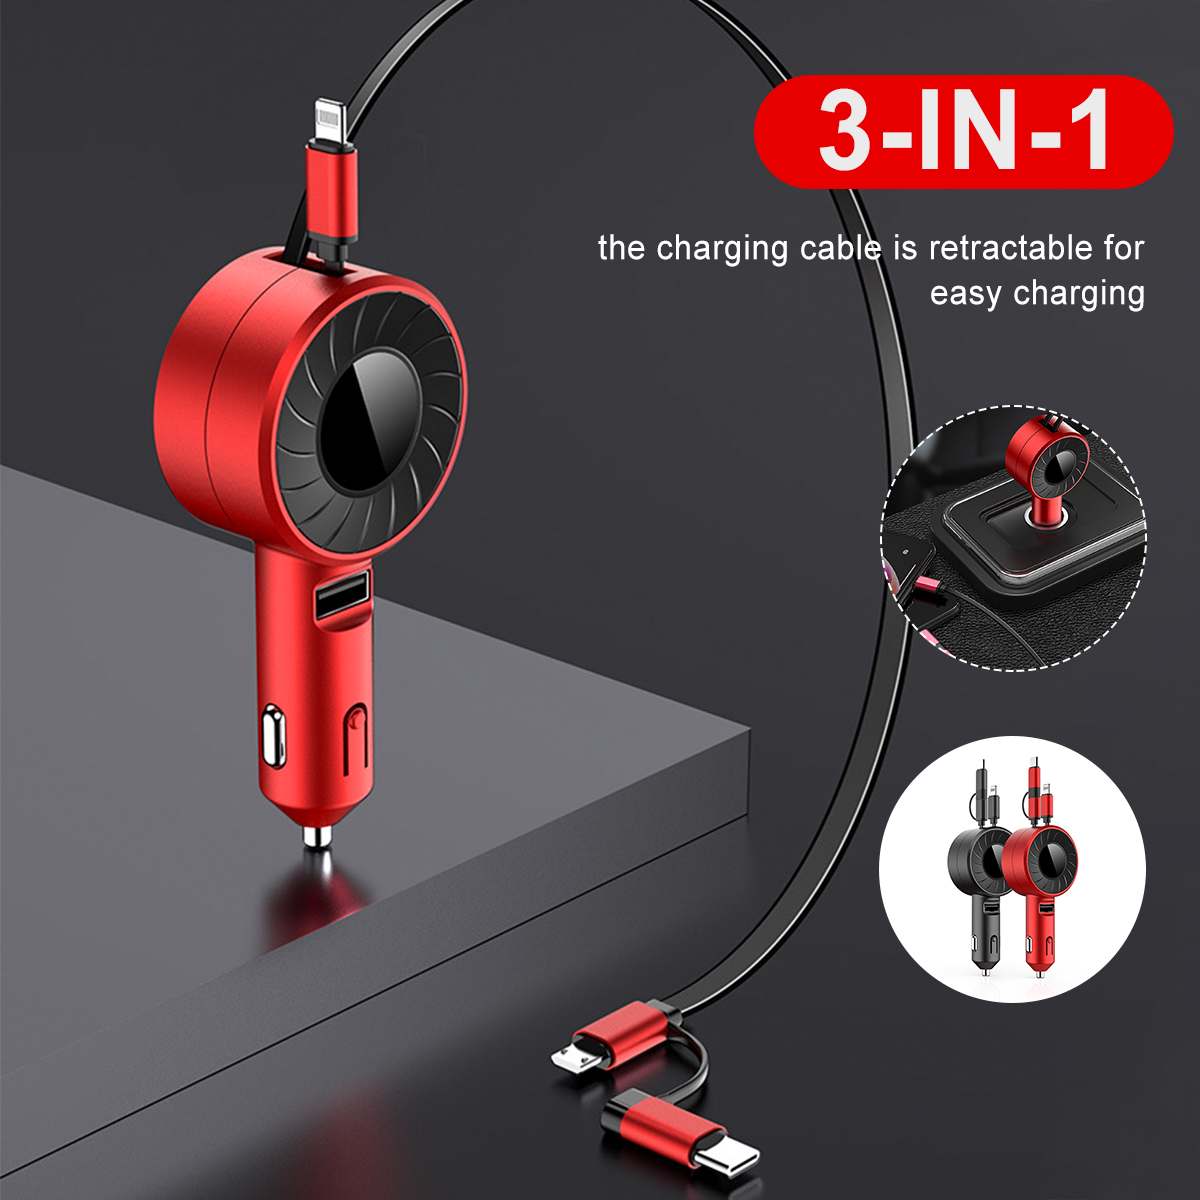 3-in-1 Car Charging Cable